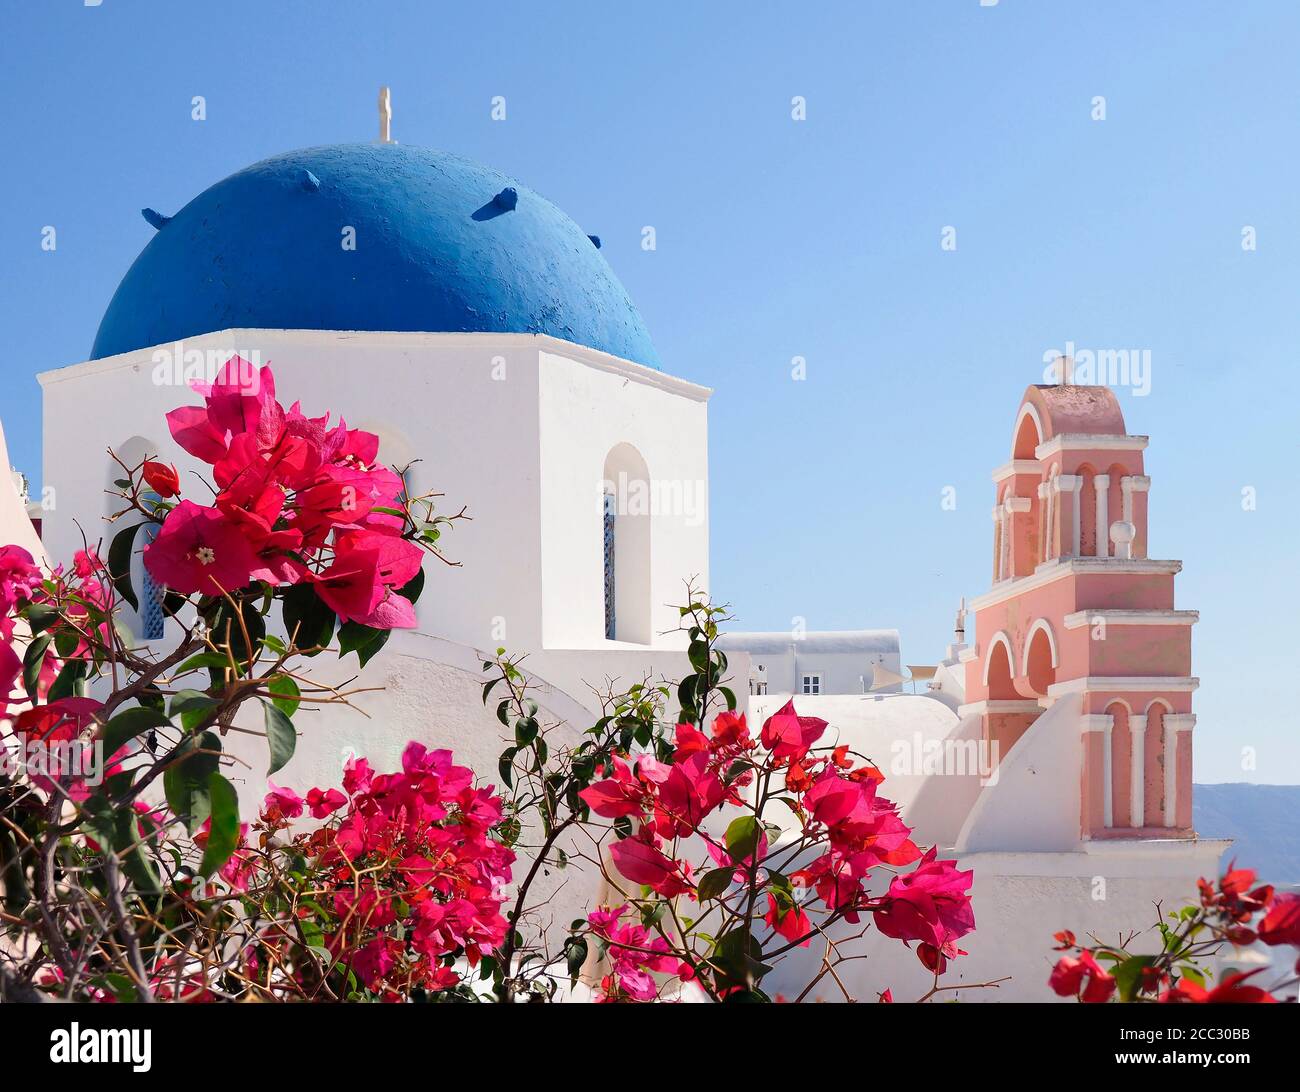 Focus Stacked Image of Bougainvillea and Church in Santorini, Greece Stock Photo